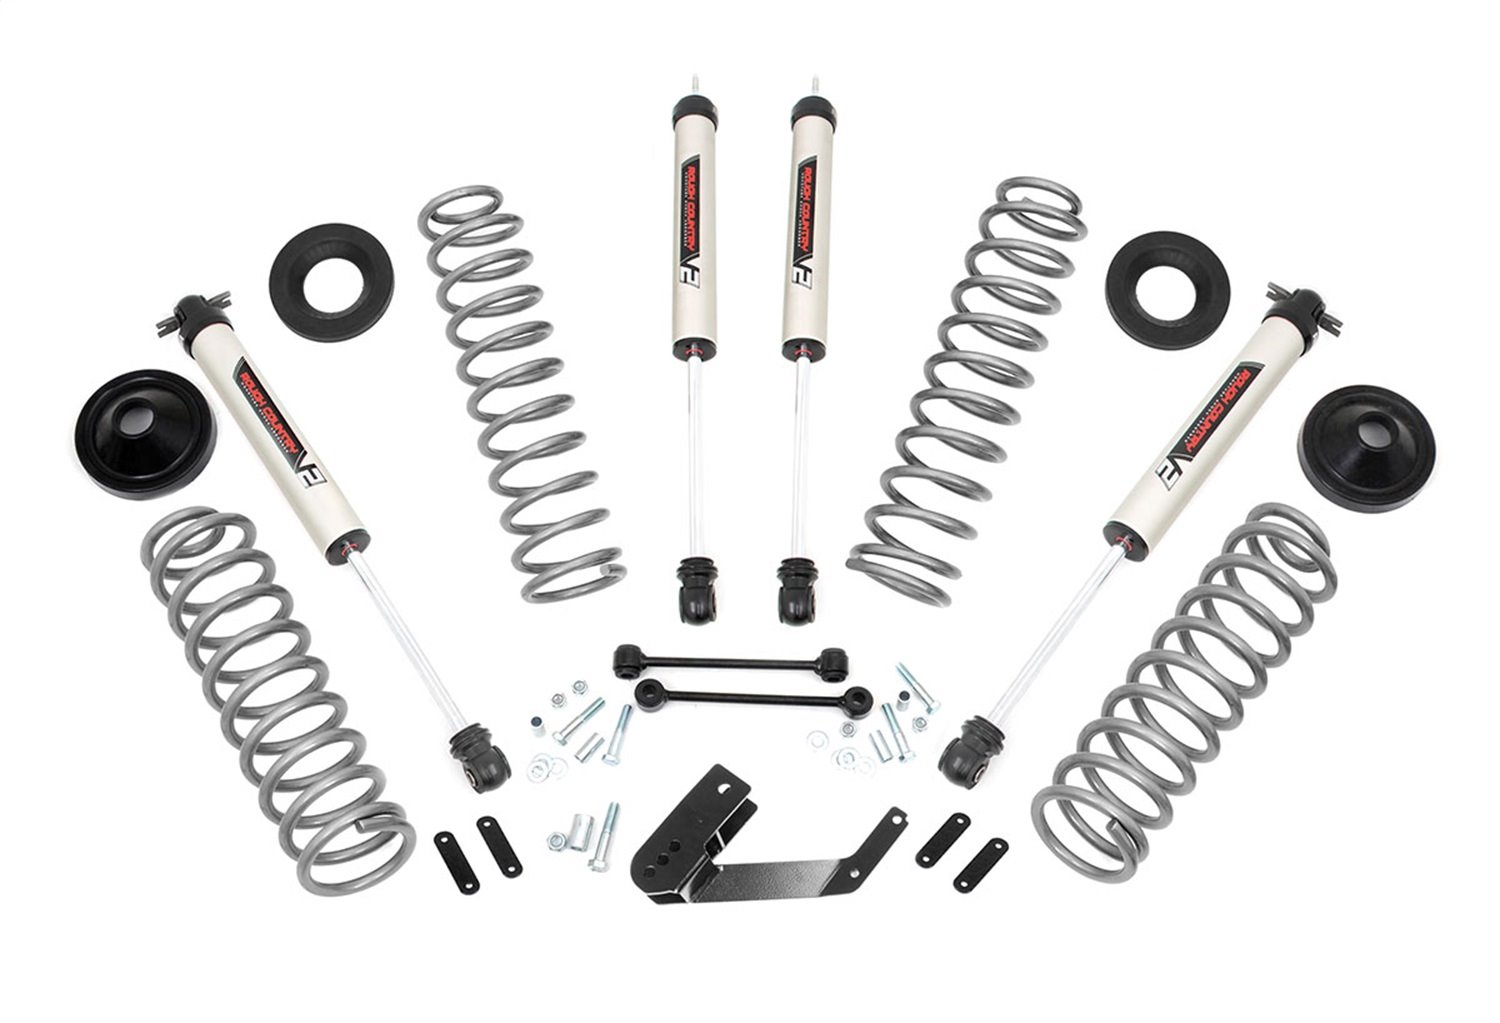 66970 Front and Rear Suspension Lift Kit, Lift Amount: 3.25 in. Front/3.25 in. Rear